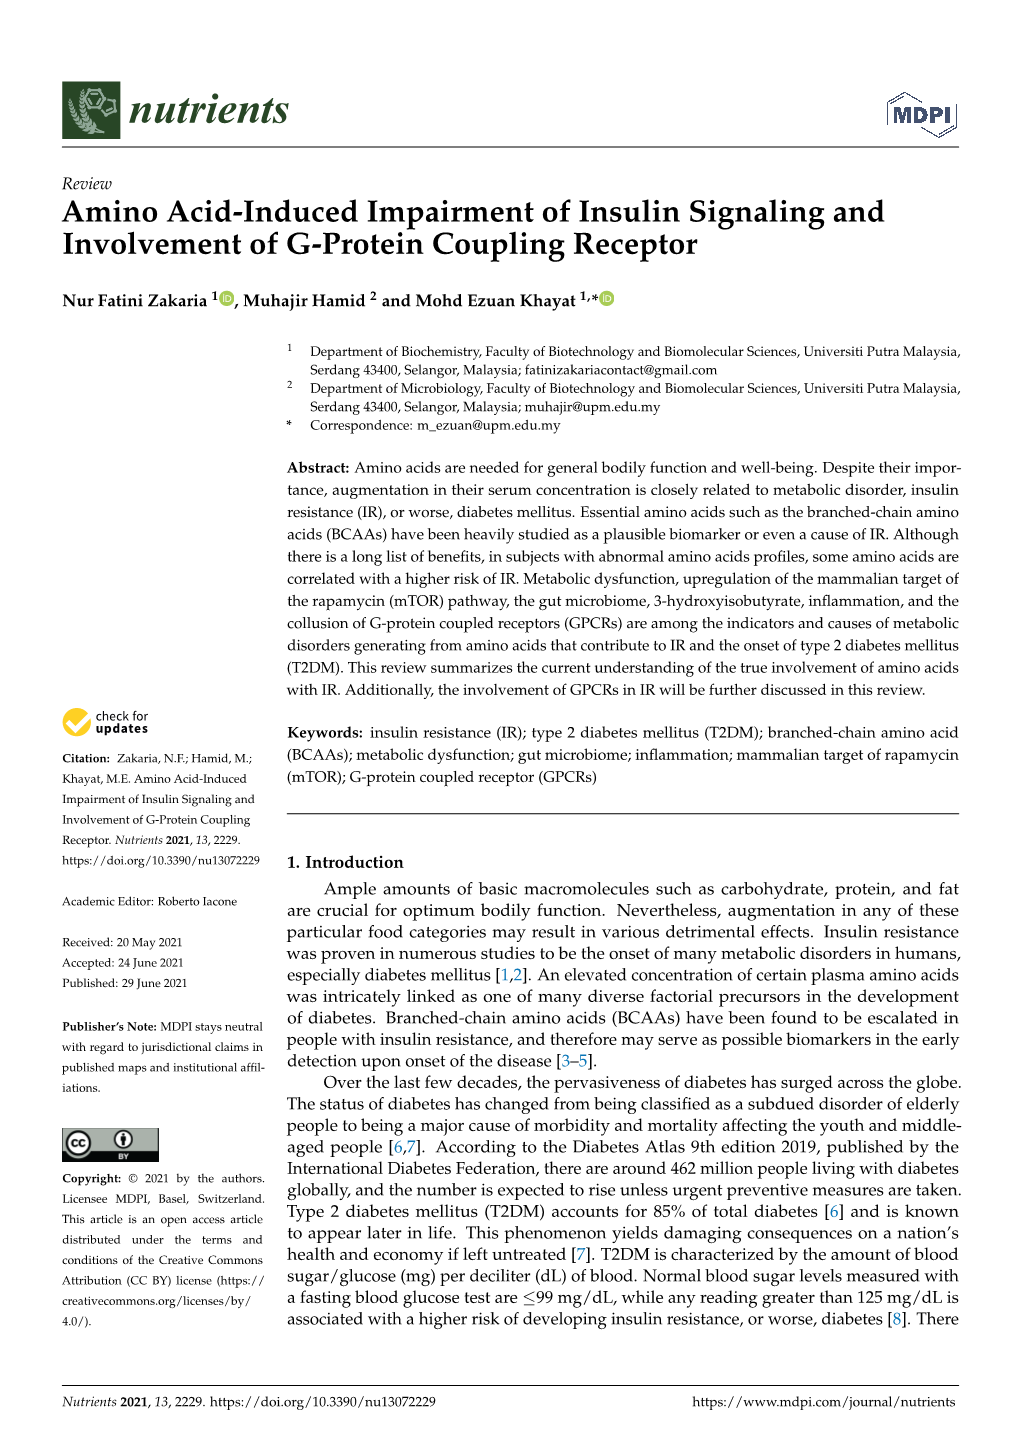 Amino Acid-Induced Impairment of Insulin Signaling and Involvement of G-Protein Coupling Receptor